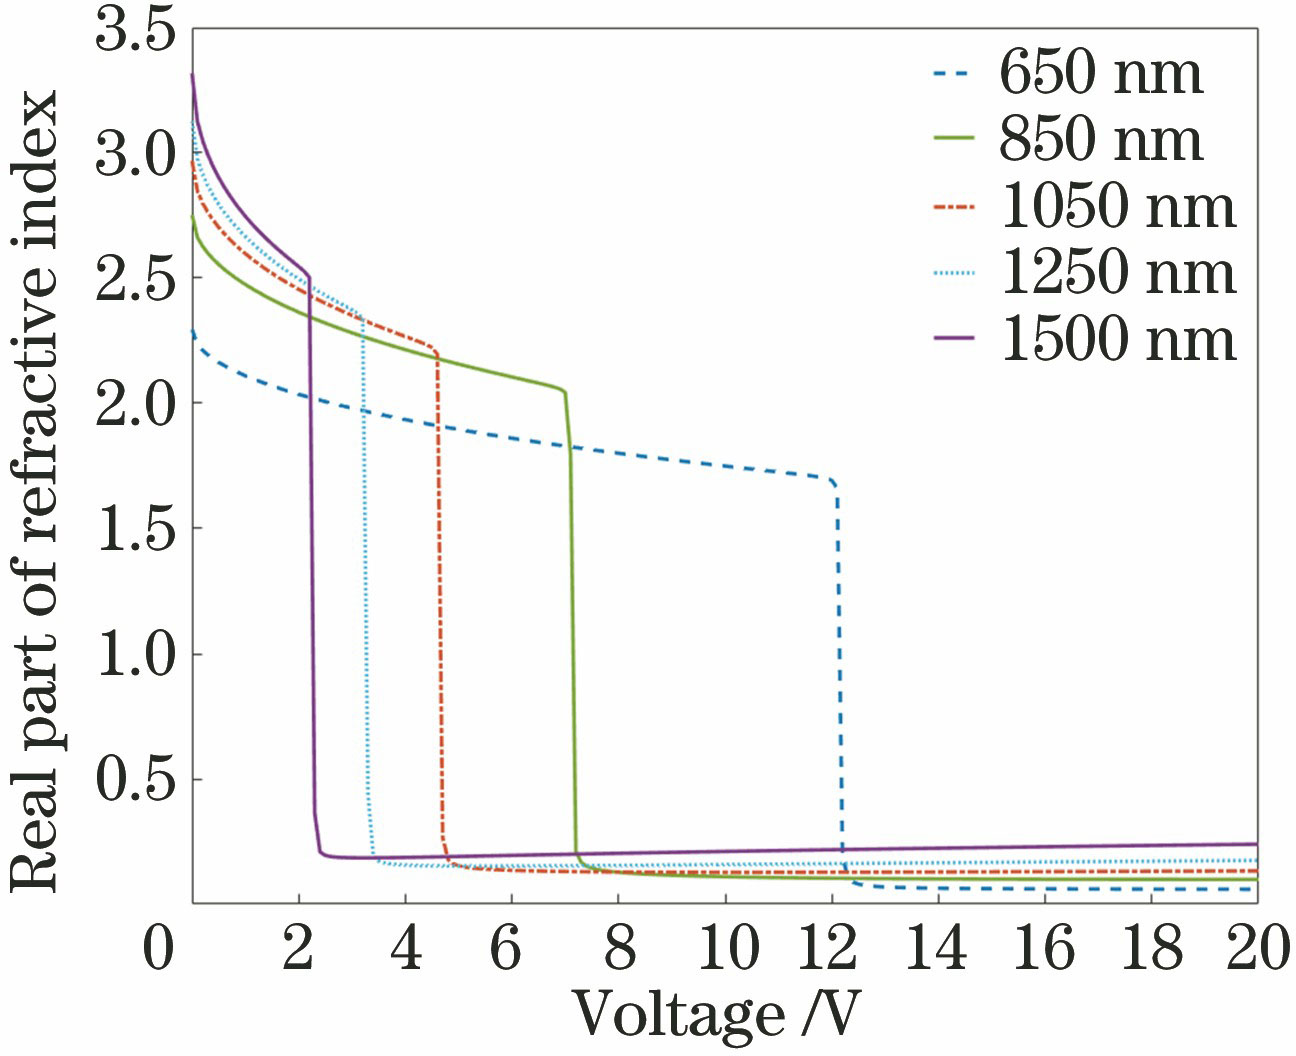 Diagram of the relationship between the real part of refractive index of graphene and driving voltage